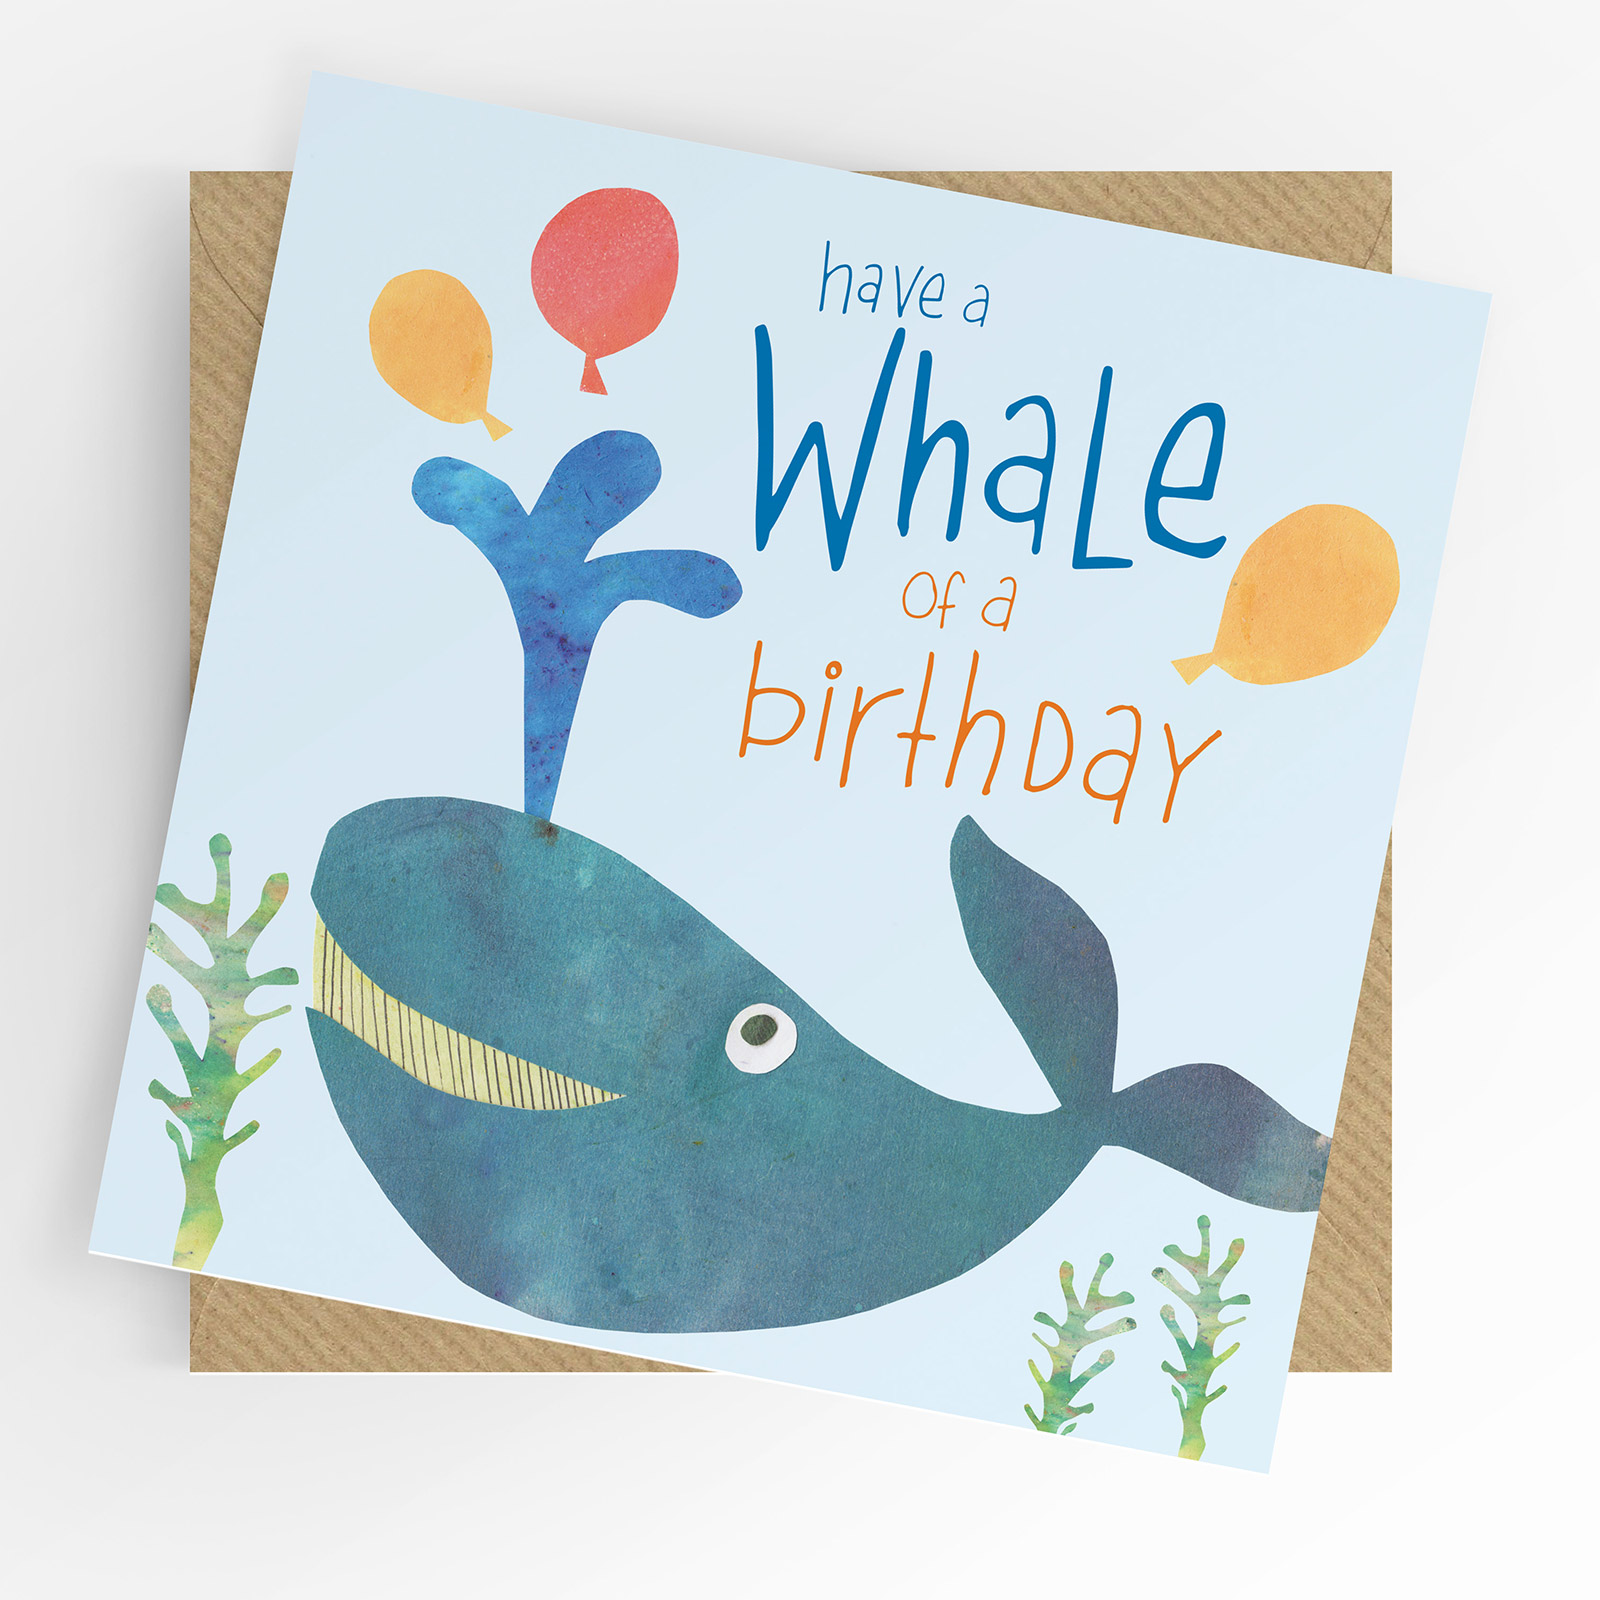 Whale of a birthday